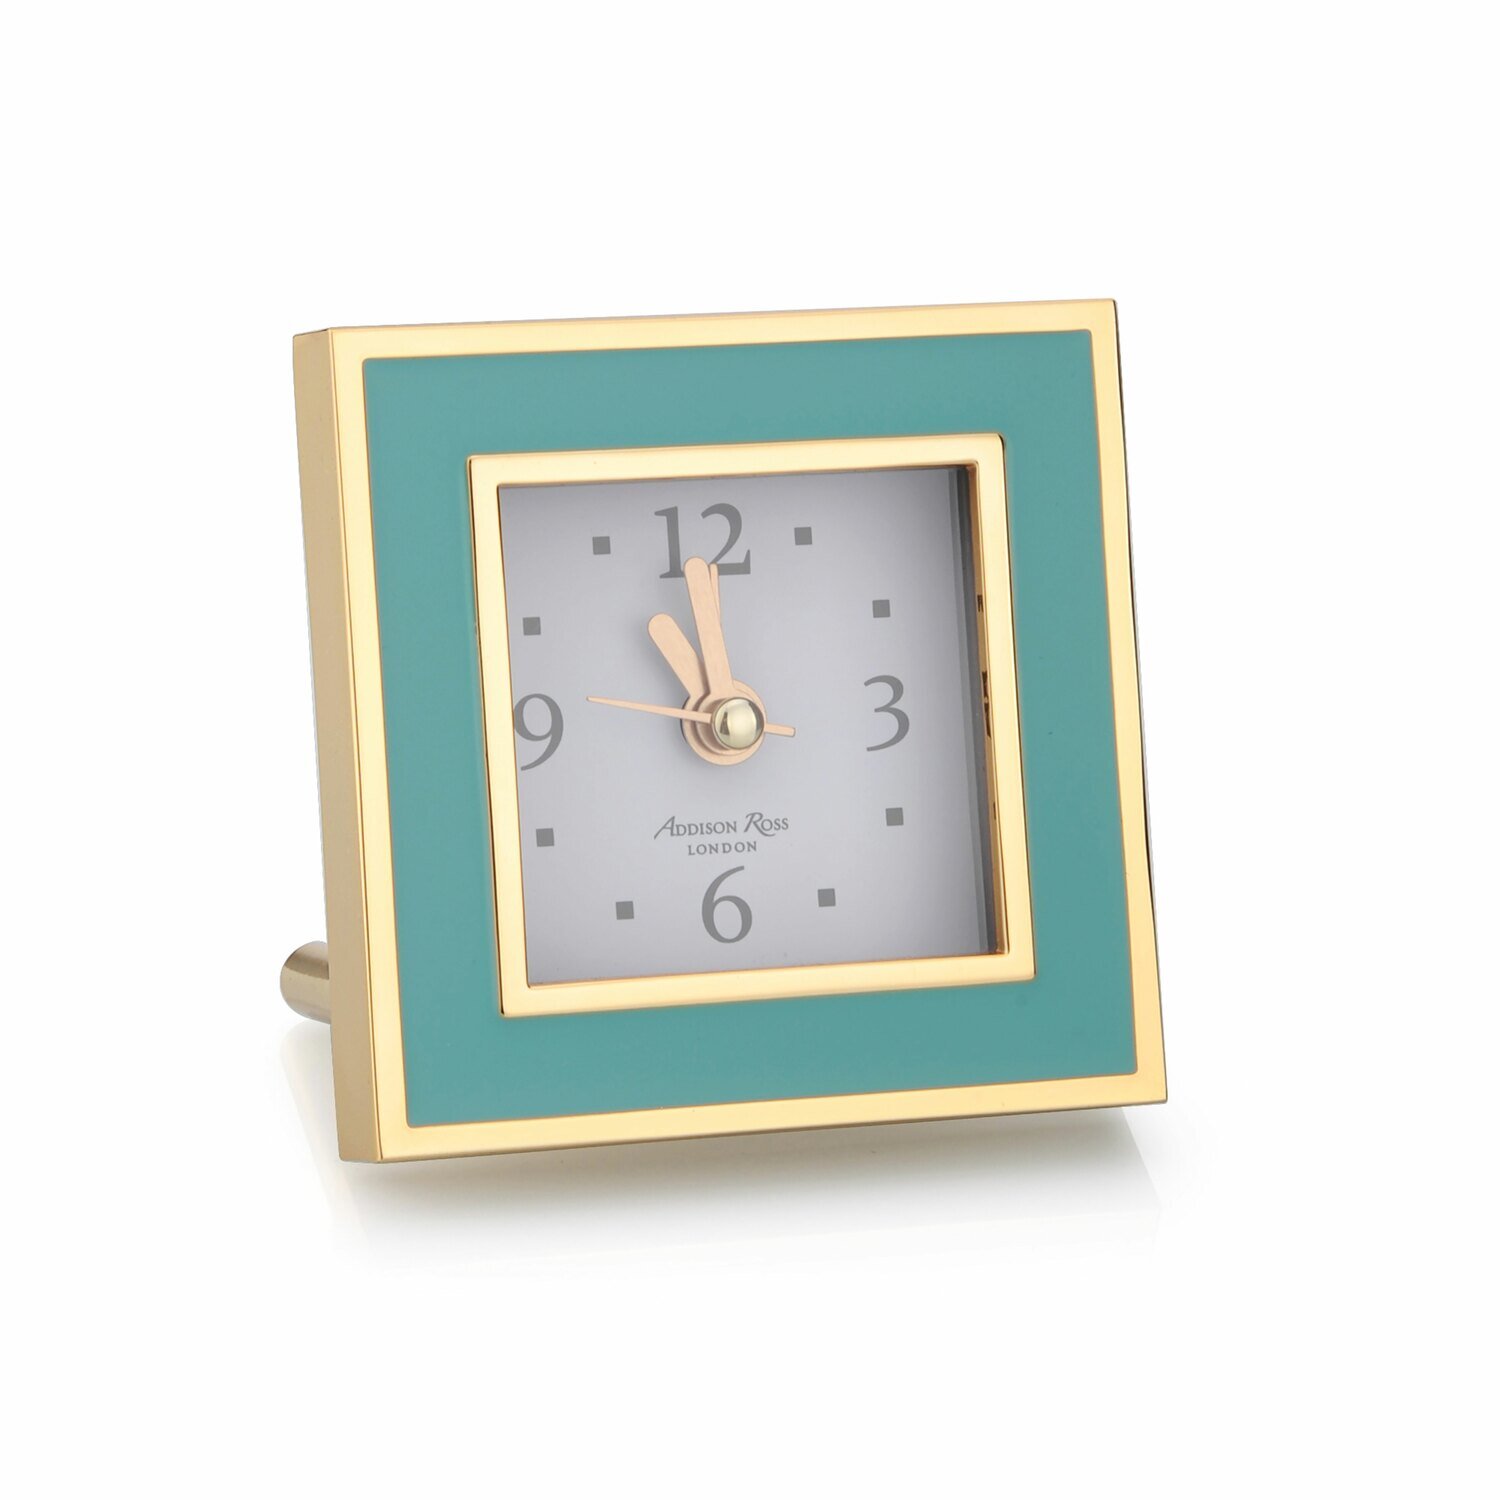 Addison Ross Turquoise & Gold Square Silent Alarm Clock 3 x 3 Inch e-Gold Plating FR1021